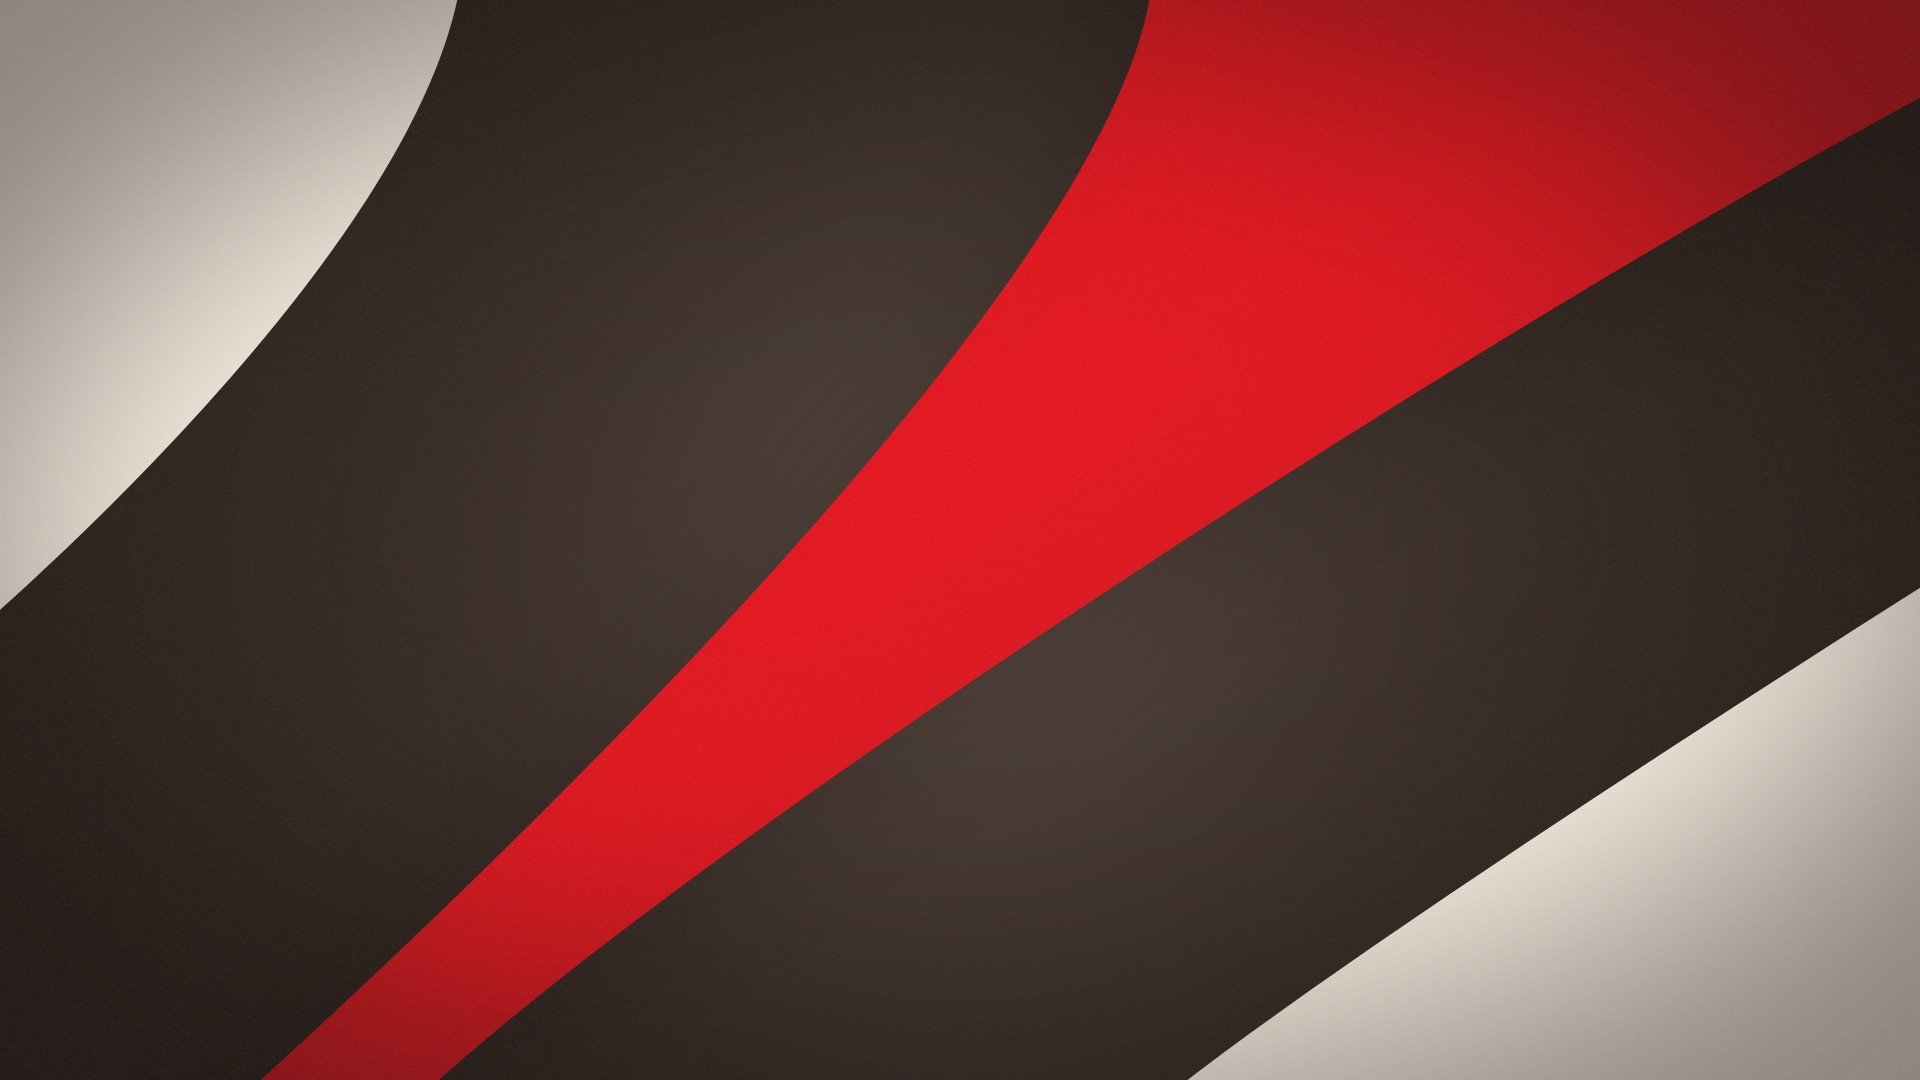 Clean Red And Black Background - 1920x1080 Wallpaper 